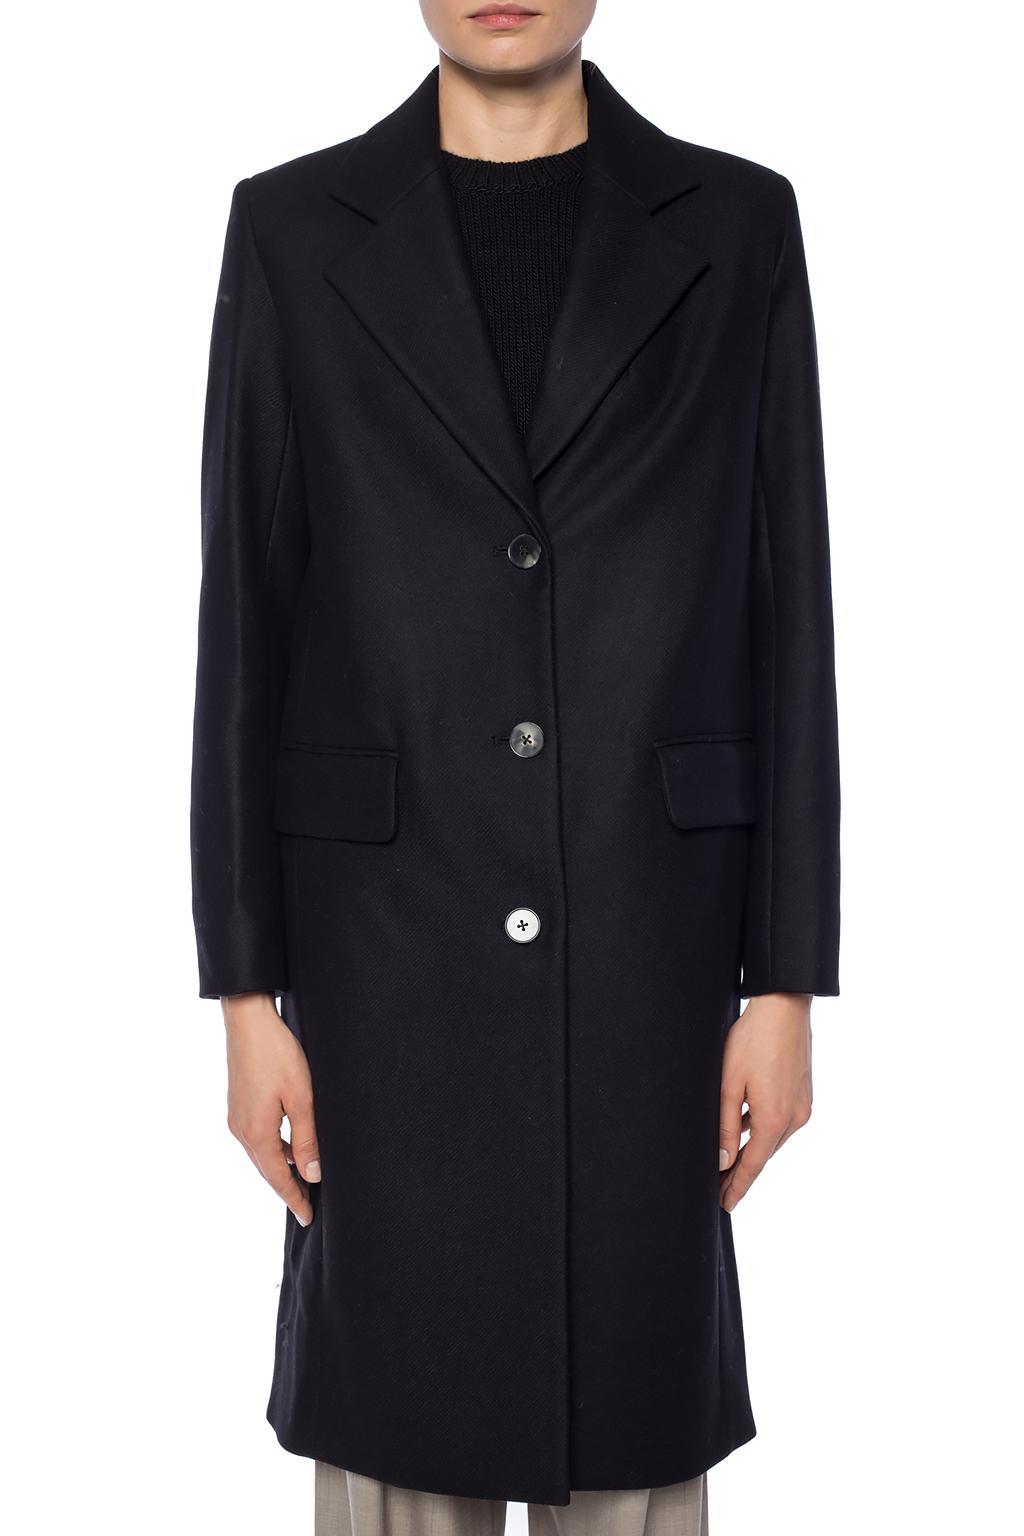 Lyst - The Row Cut-out Coat in Black